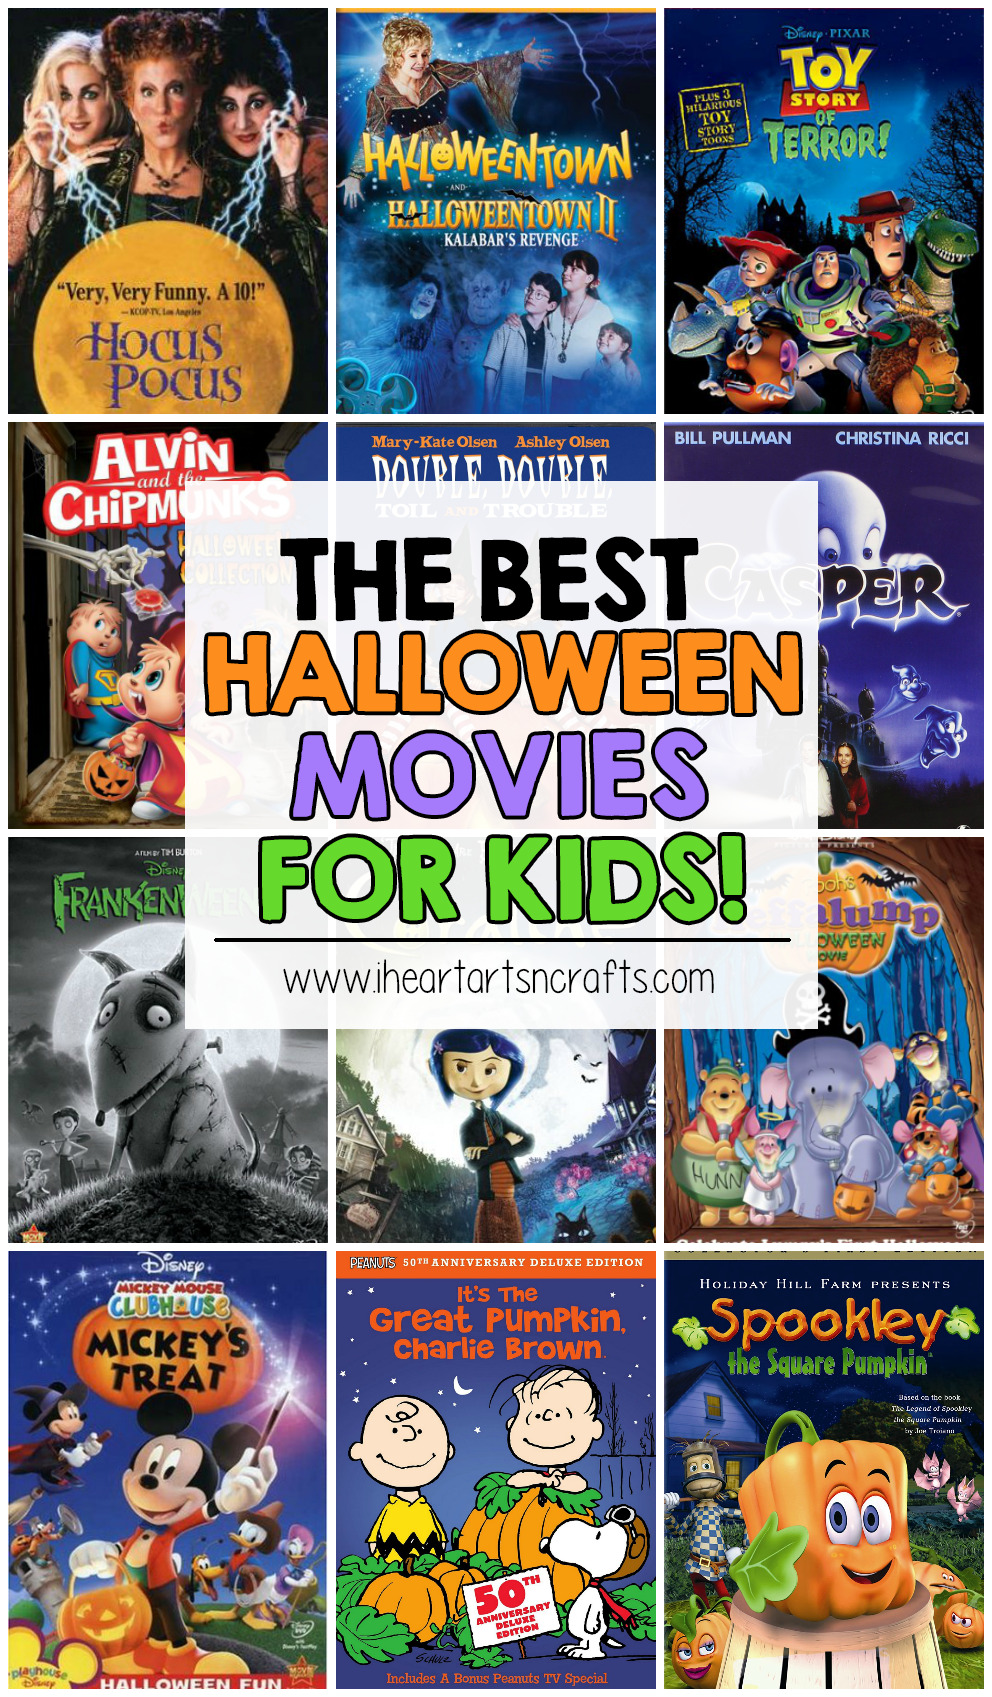 The Best Halloween Movies For Kids!